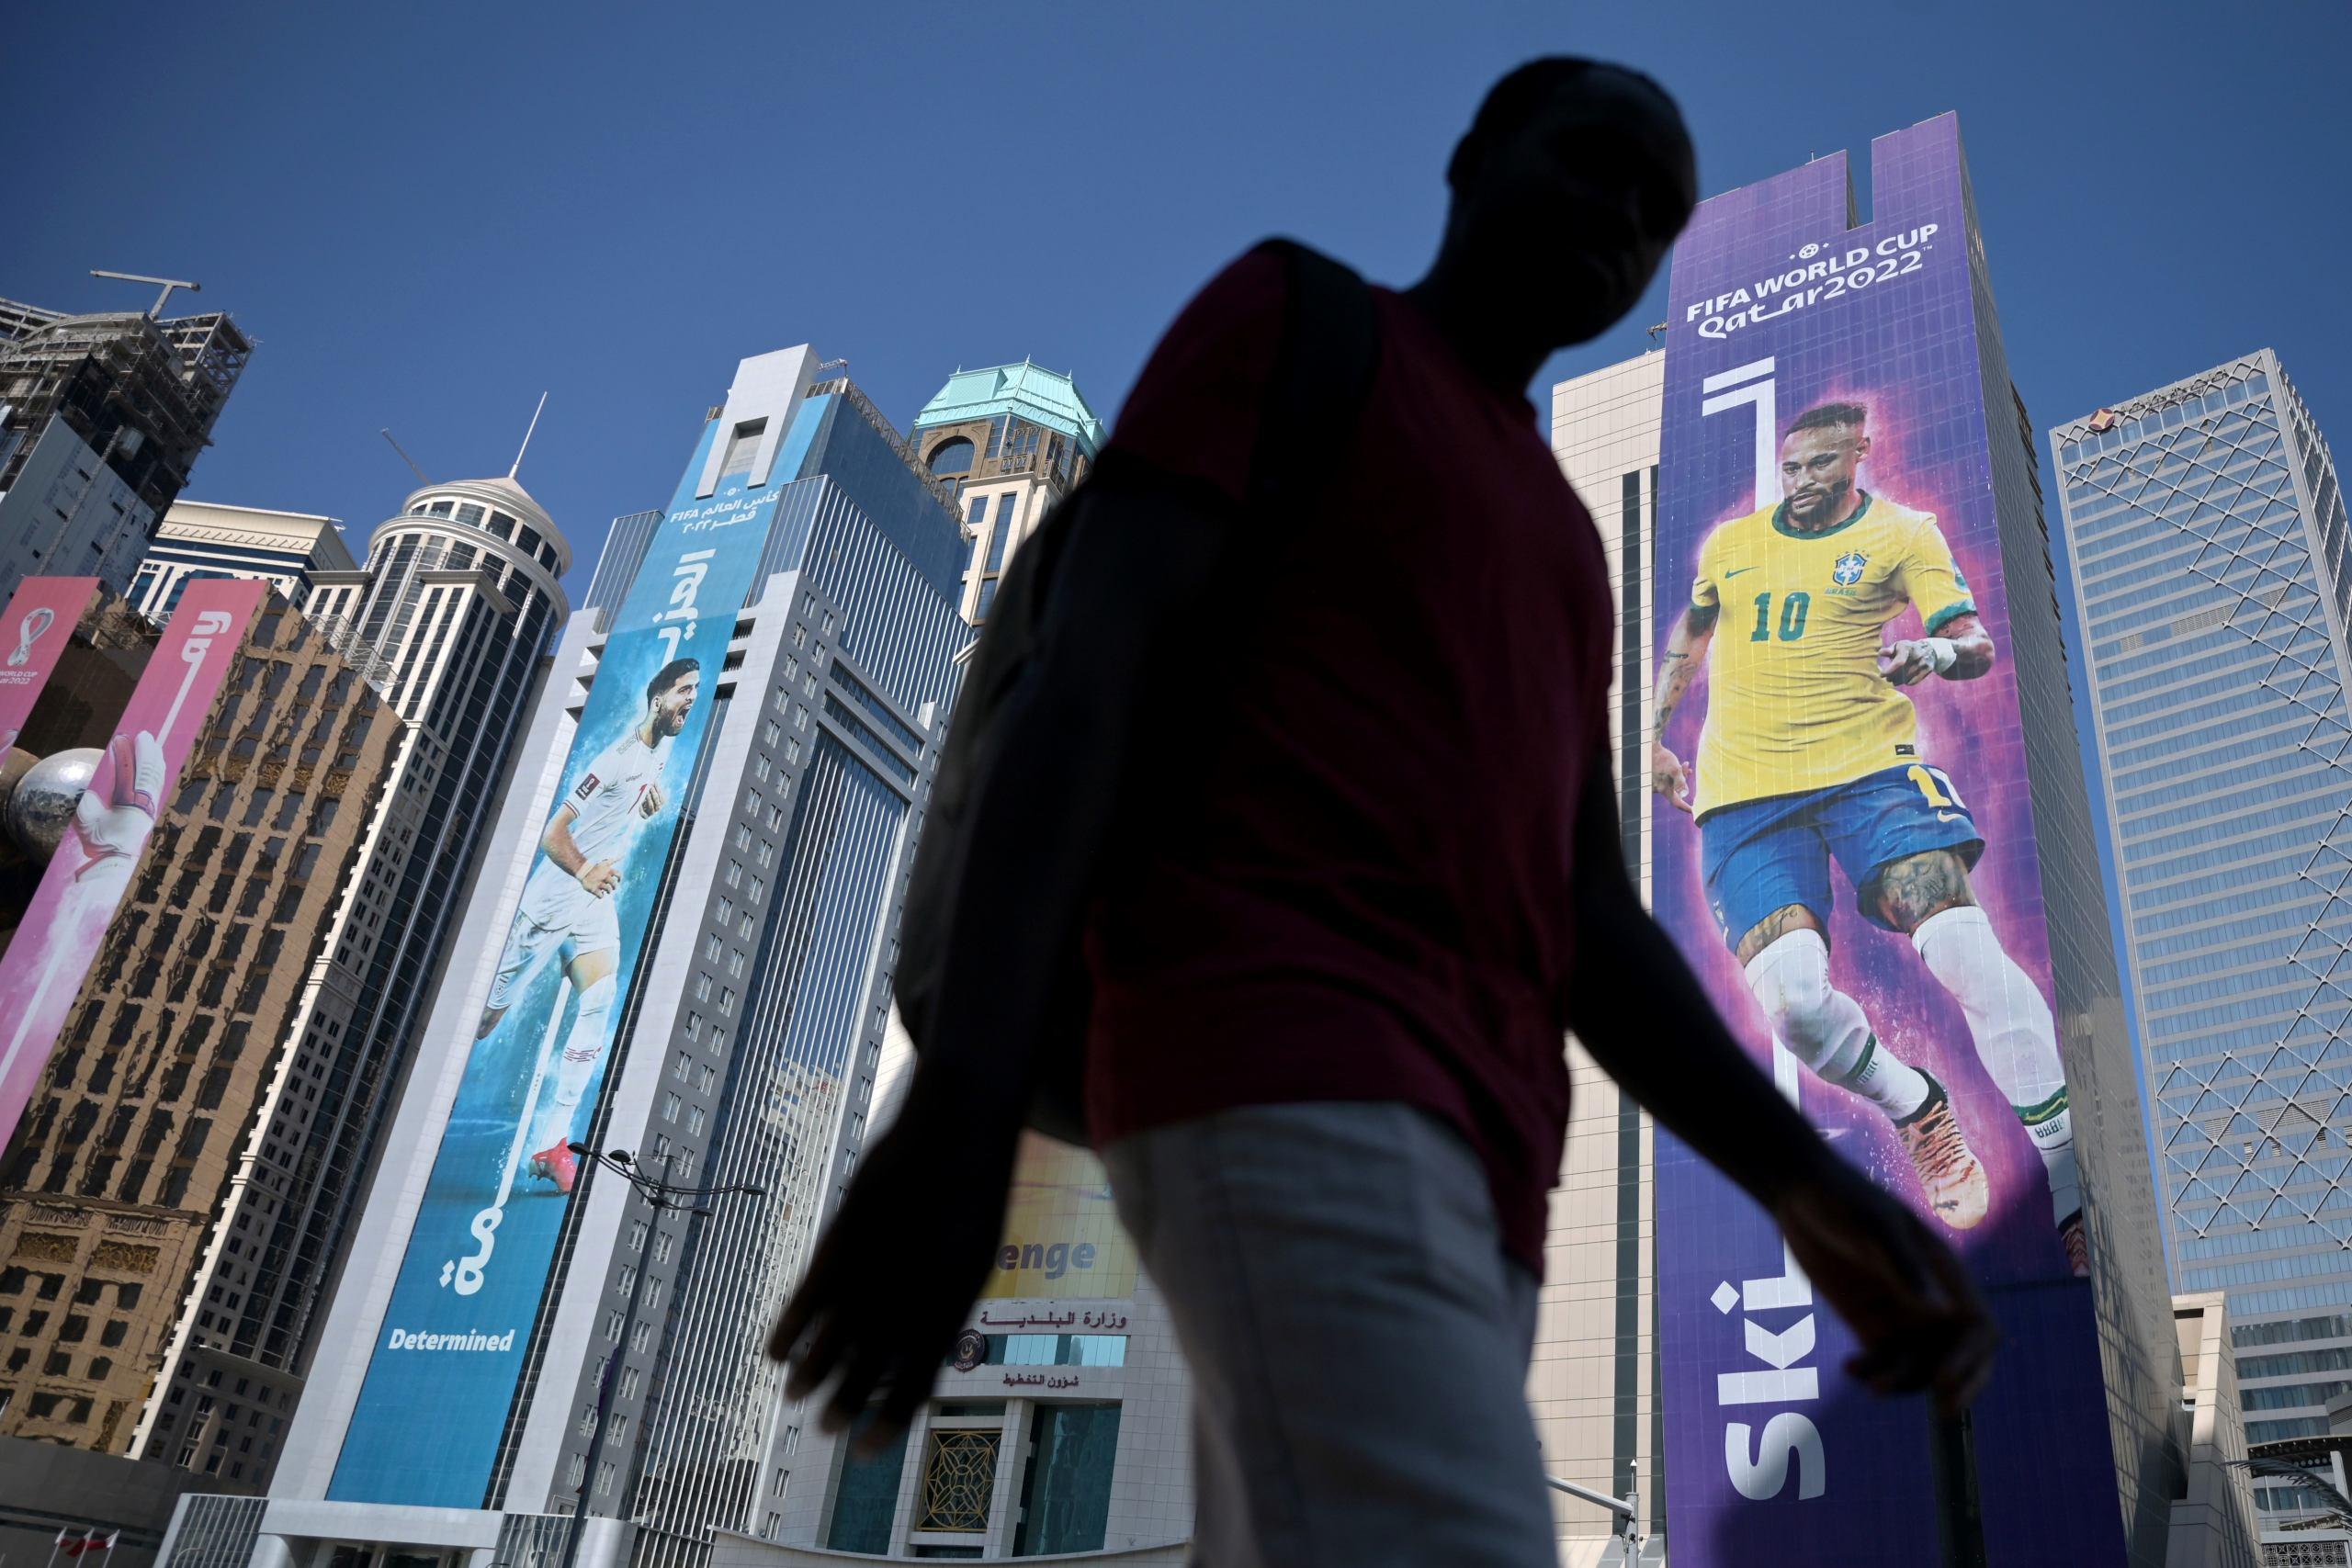 A man walks past banners of football players displayed on buildings along the Corniche in Doha on November 17, 2022, ahead of the Qatar 2022 World Cup football tournament. (Photo by Raul ARBOLEDA / AFP)